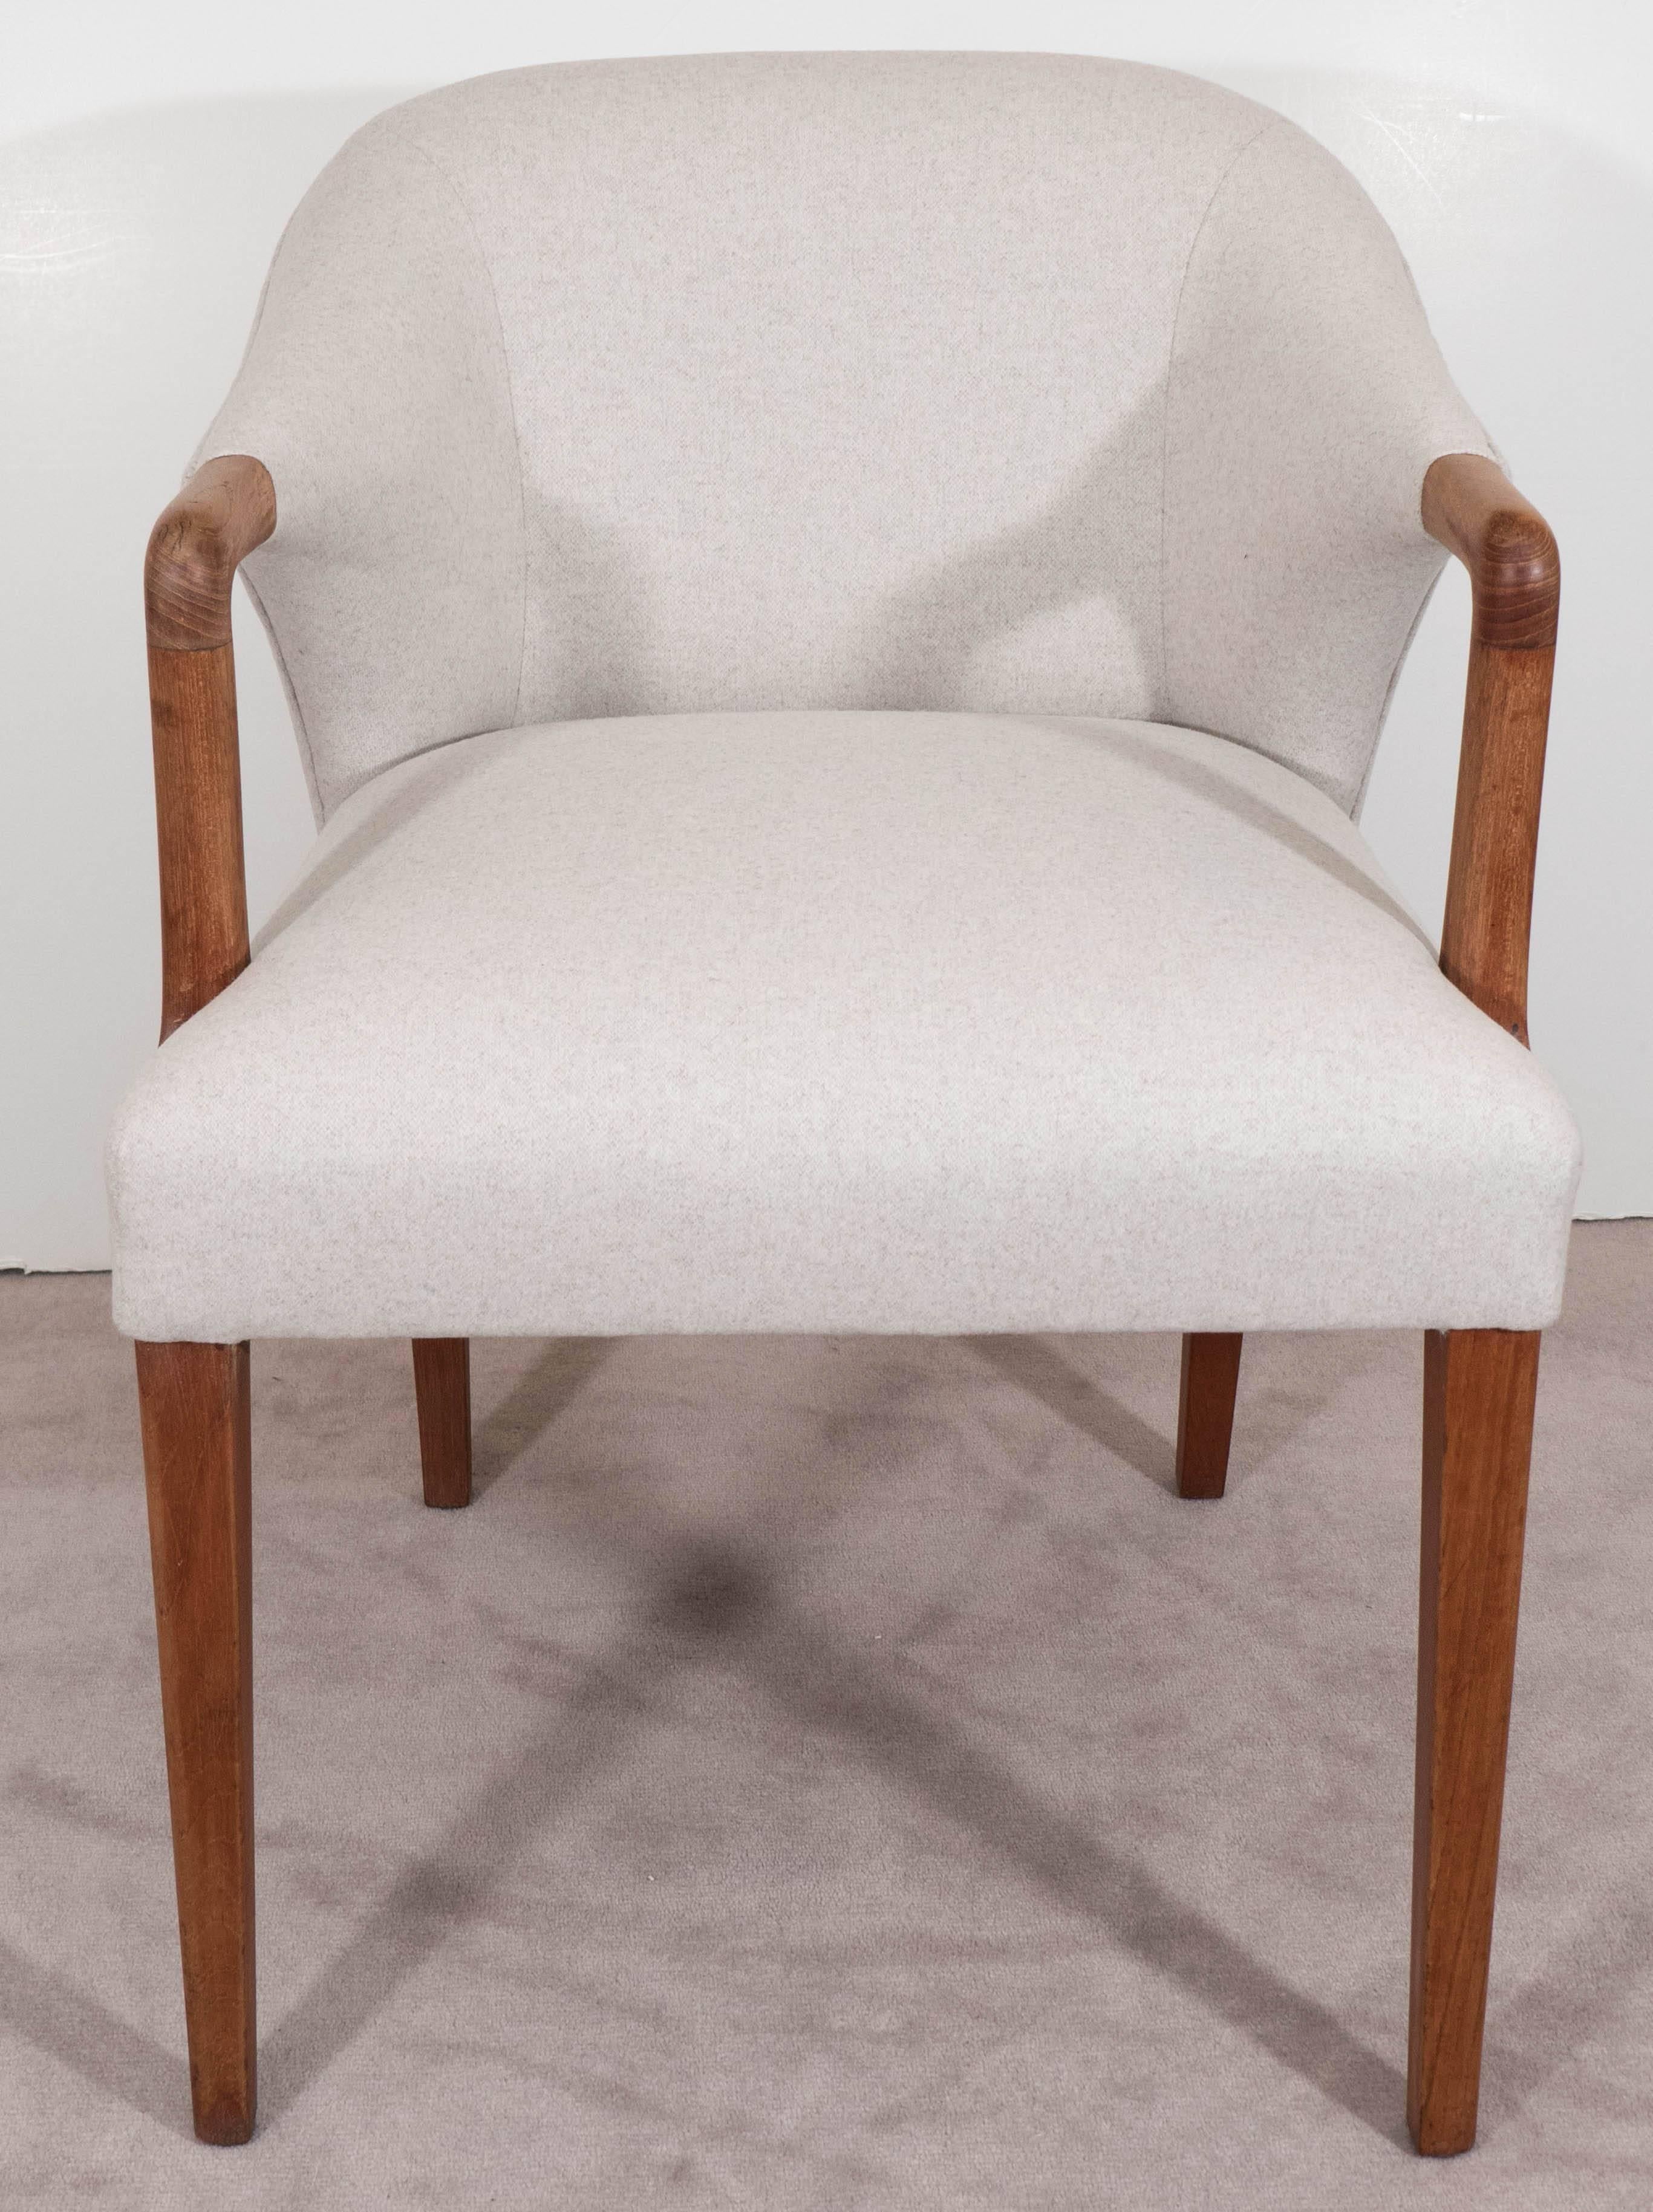 A vintage Danish armchair designed in the Scandinavian Modern style, produced circa 1950s to 1960s, with upholstered and cushioned round back and seat, against a teak frame, with gently curved arms on slightly tapered legs. This chair is in